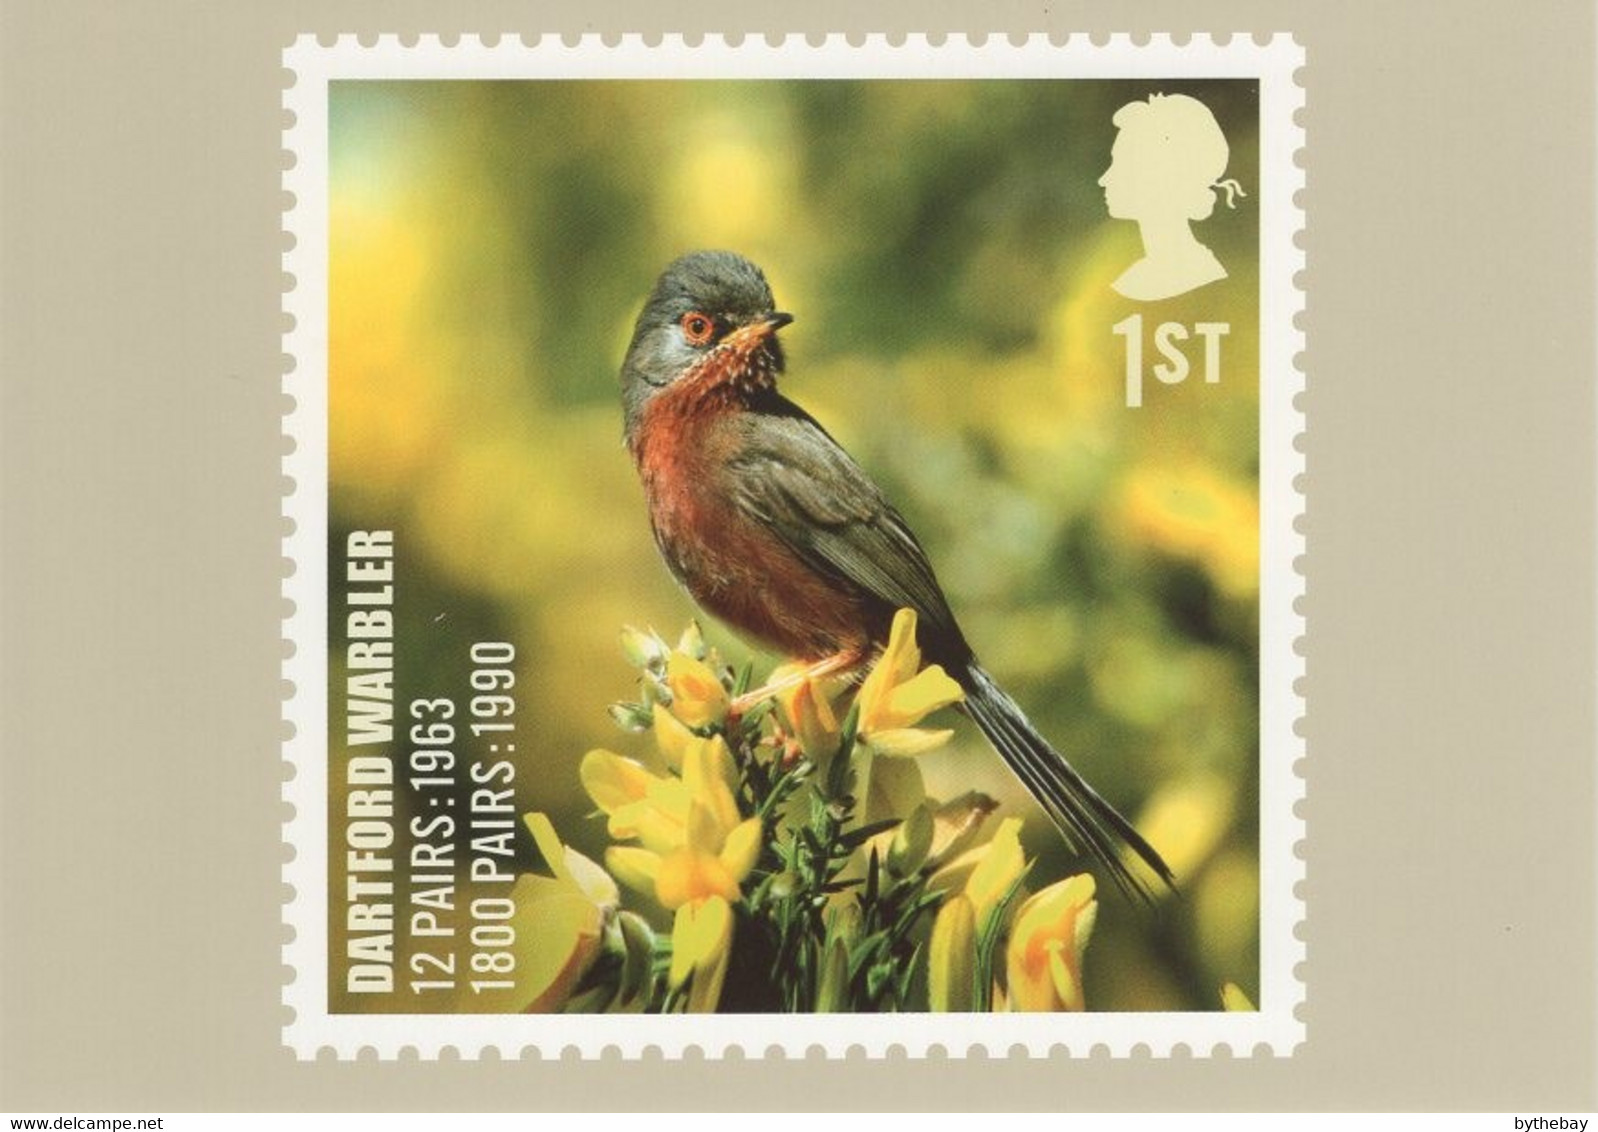 Great Britain 2007 PHQ Card Sc 2505 1st Dartford Warbler - PHQ Cards